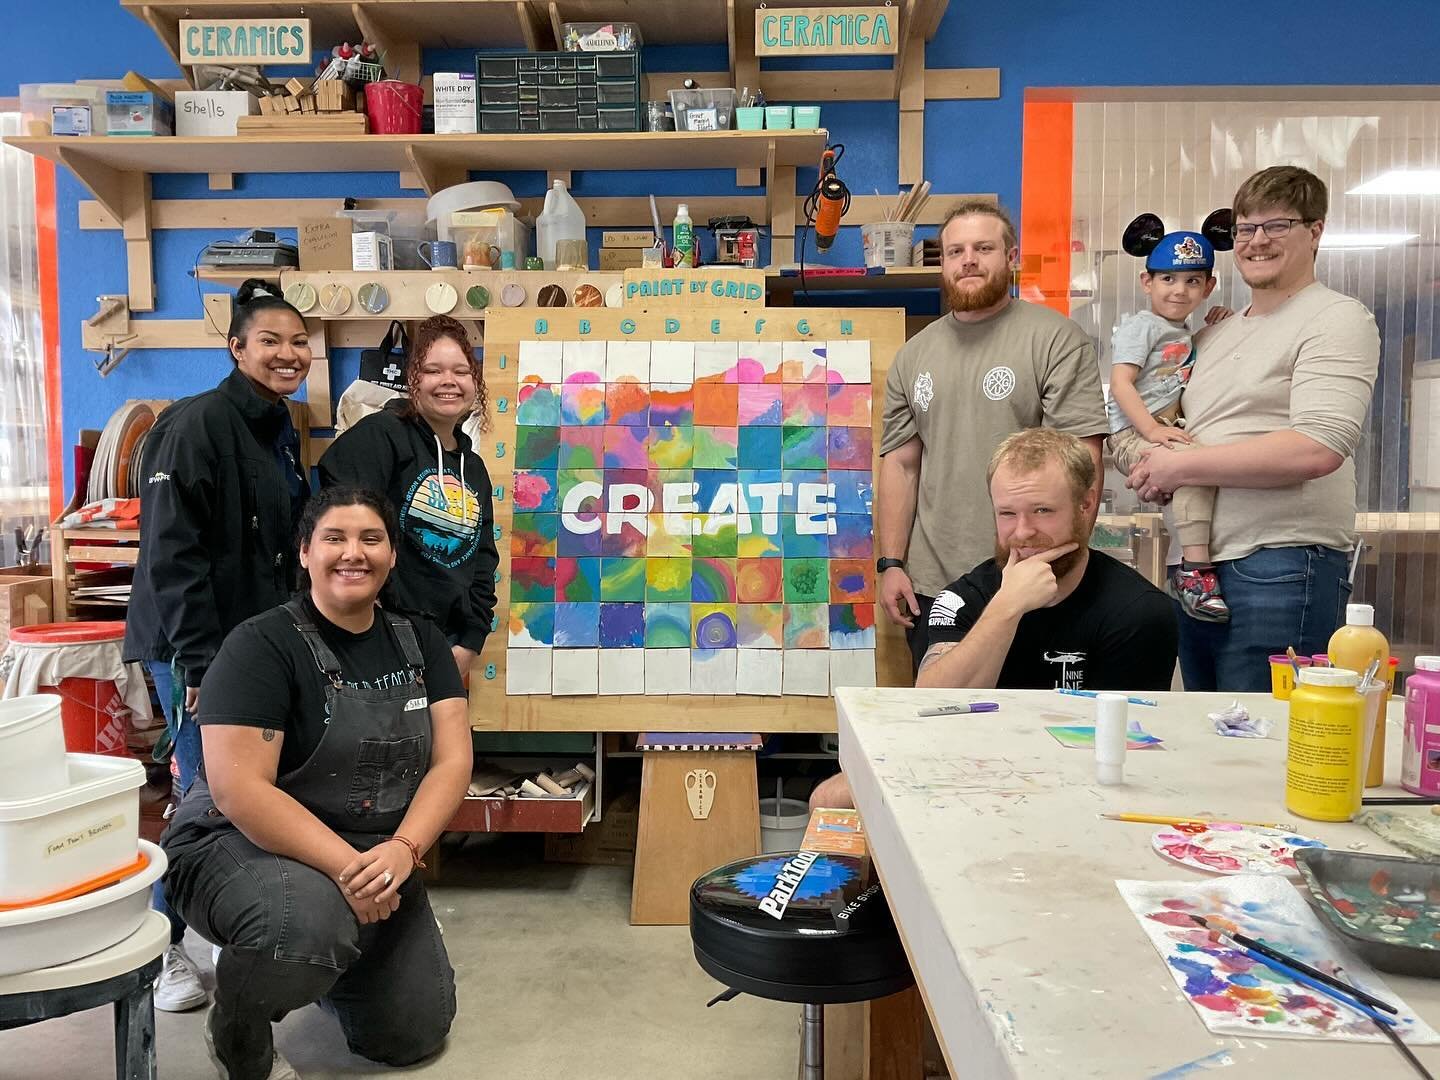 [Espa&ntilde;ol abajo] 🔅☺️
Talent Maker City had a wonderful opportunity to engage in STEAM learning activities with the Jackson County Juvenile Justice team. They came to visit our shop to explore bed building and paint by grid projects, which they